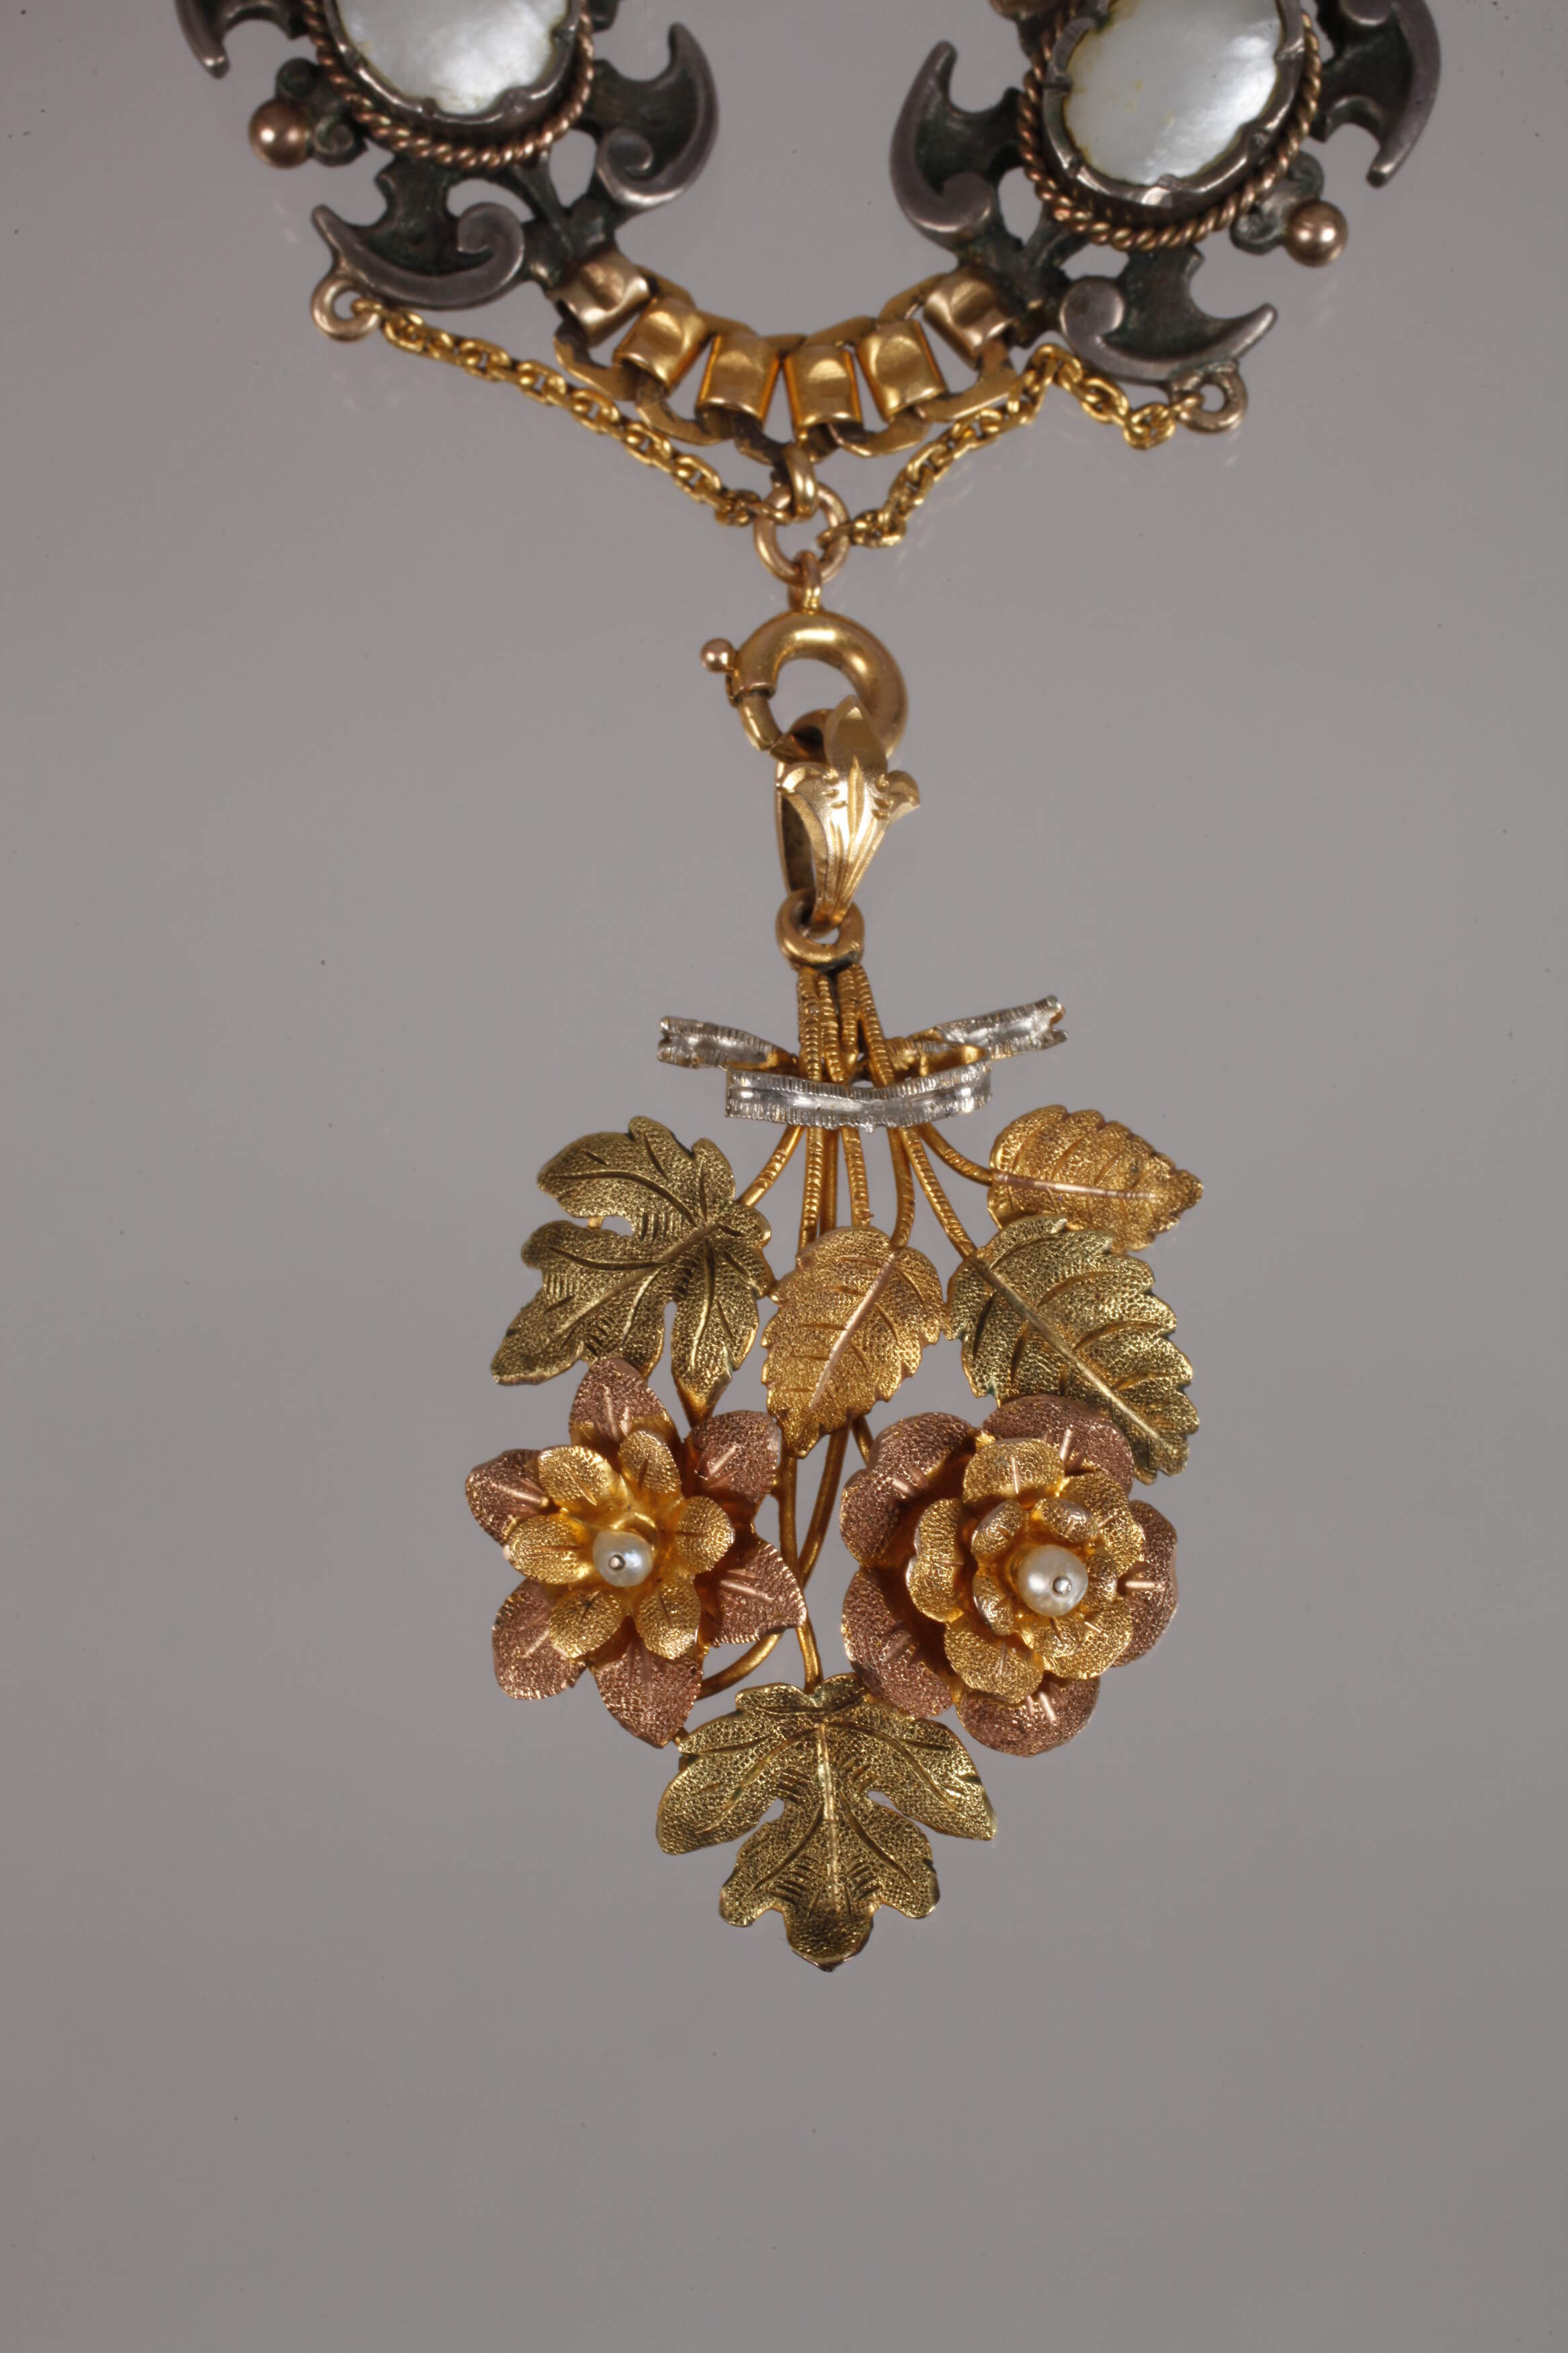 Historicist necklace - Image 2 of 3